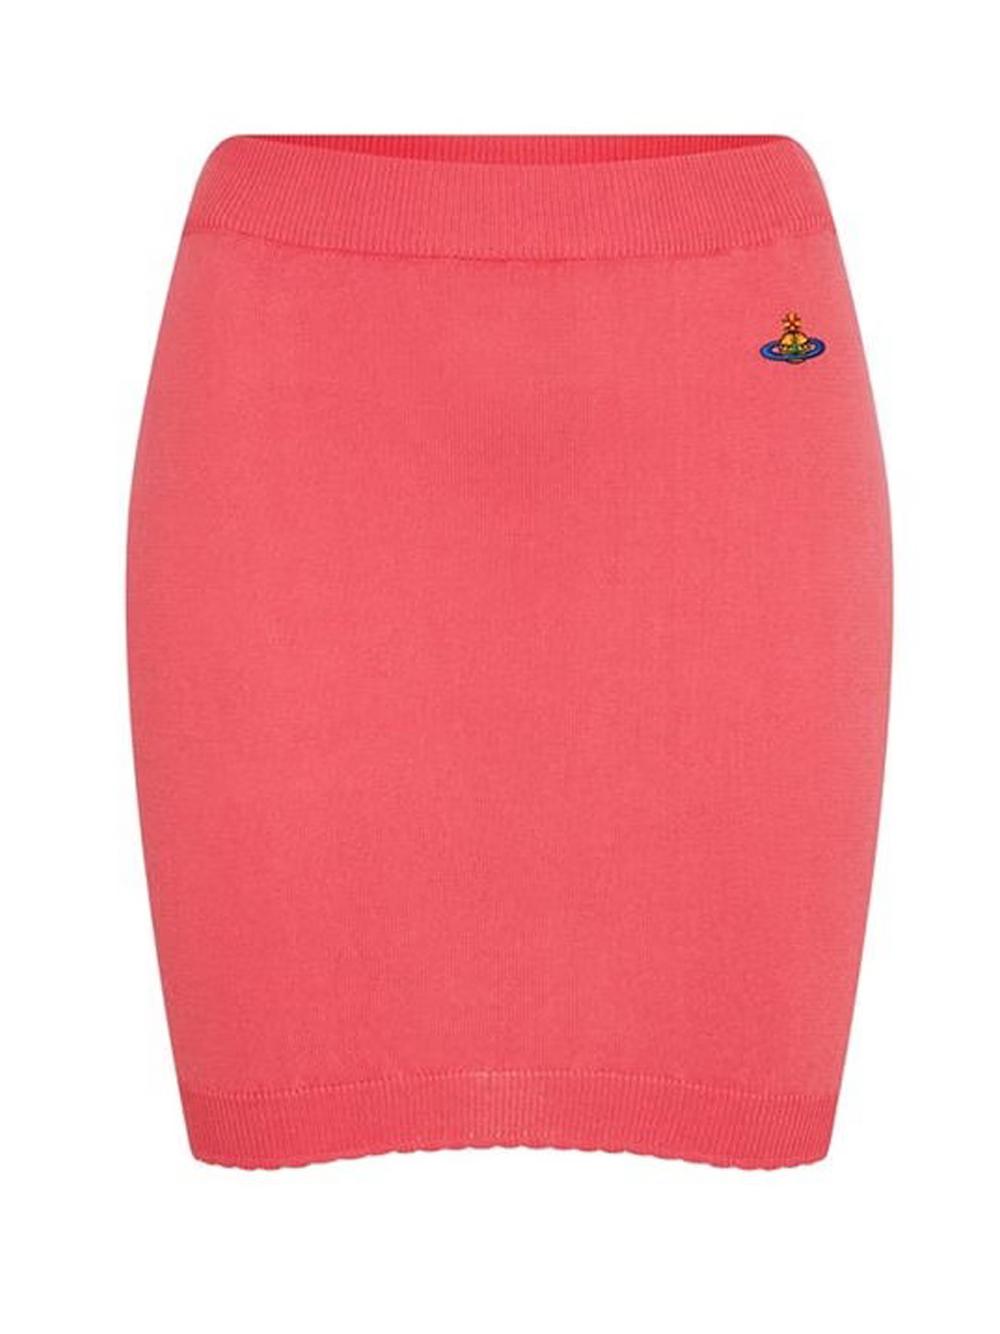 Vivienne Westwood Bea Mini Skirt Coral In Cotton in Pink | Lyst UK